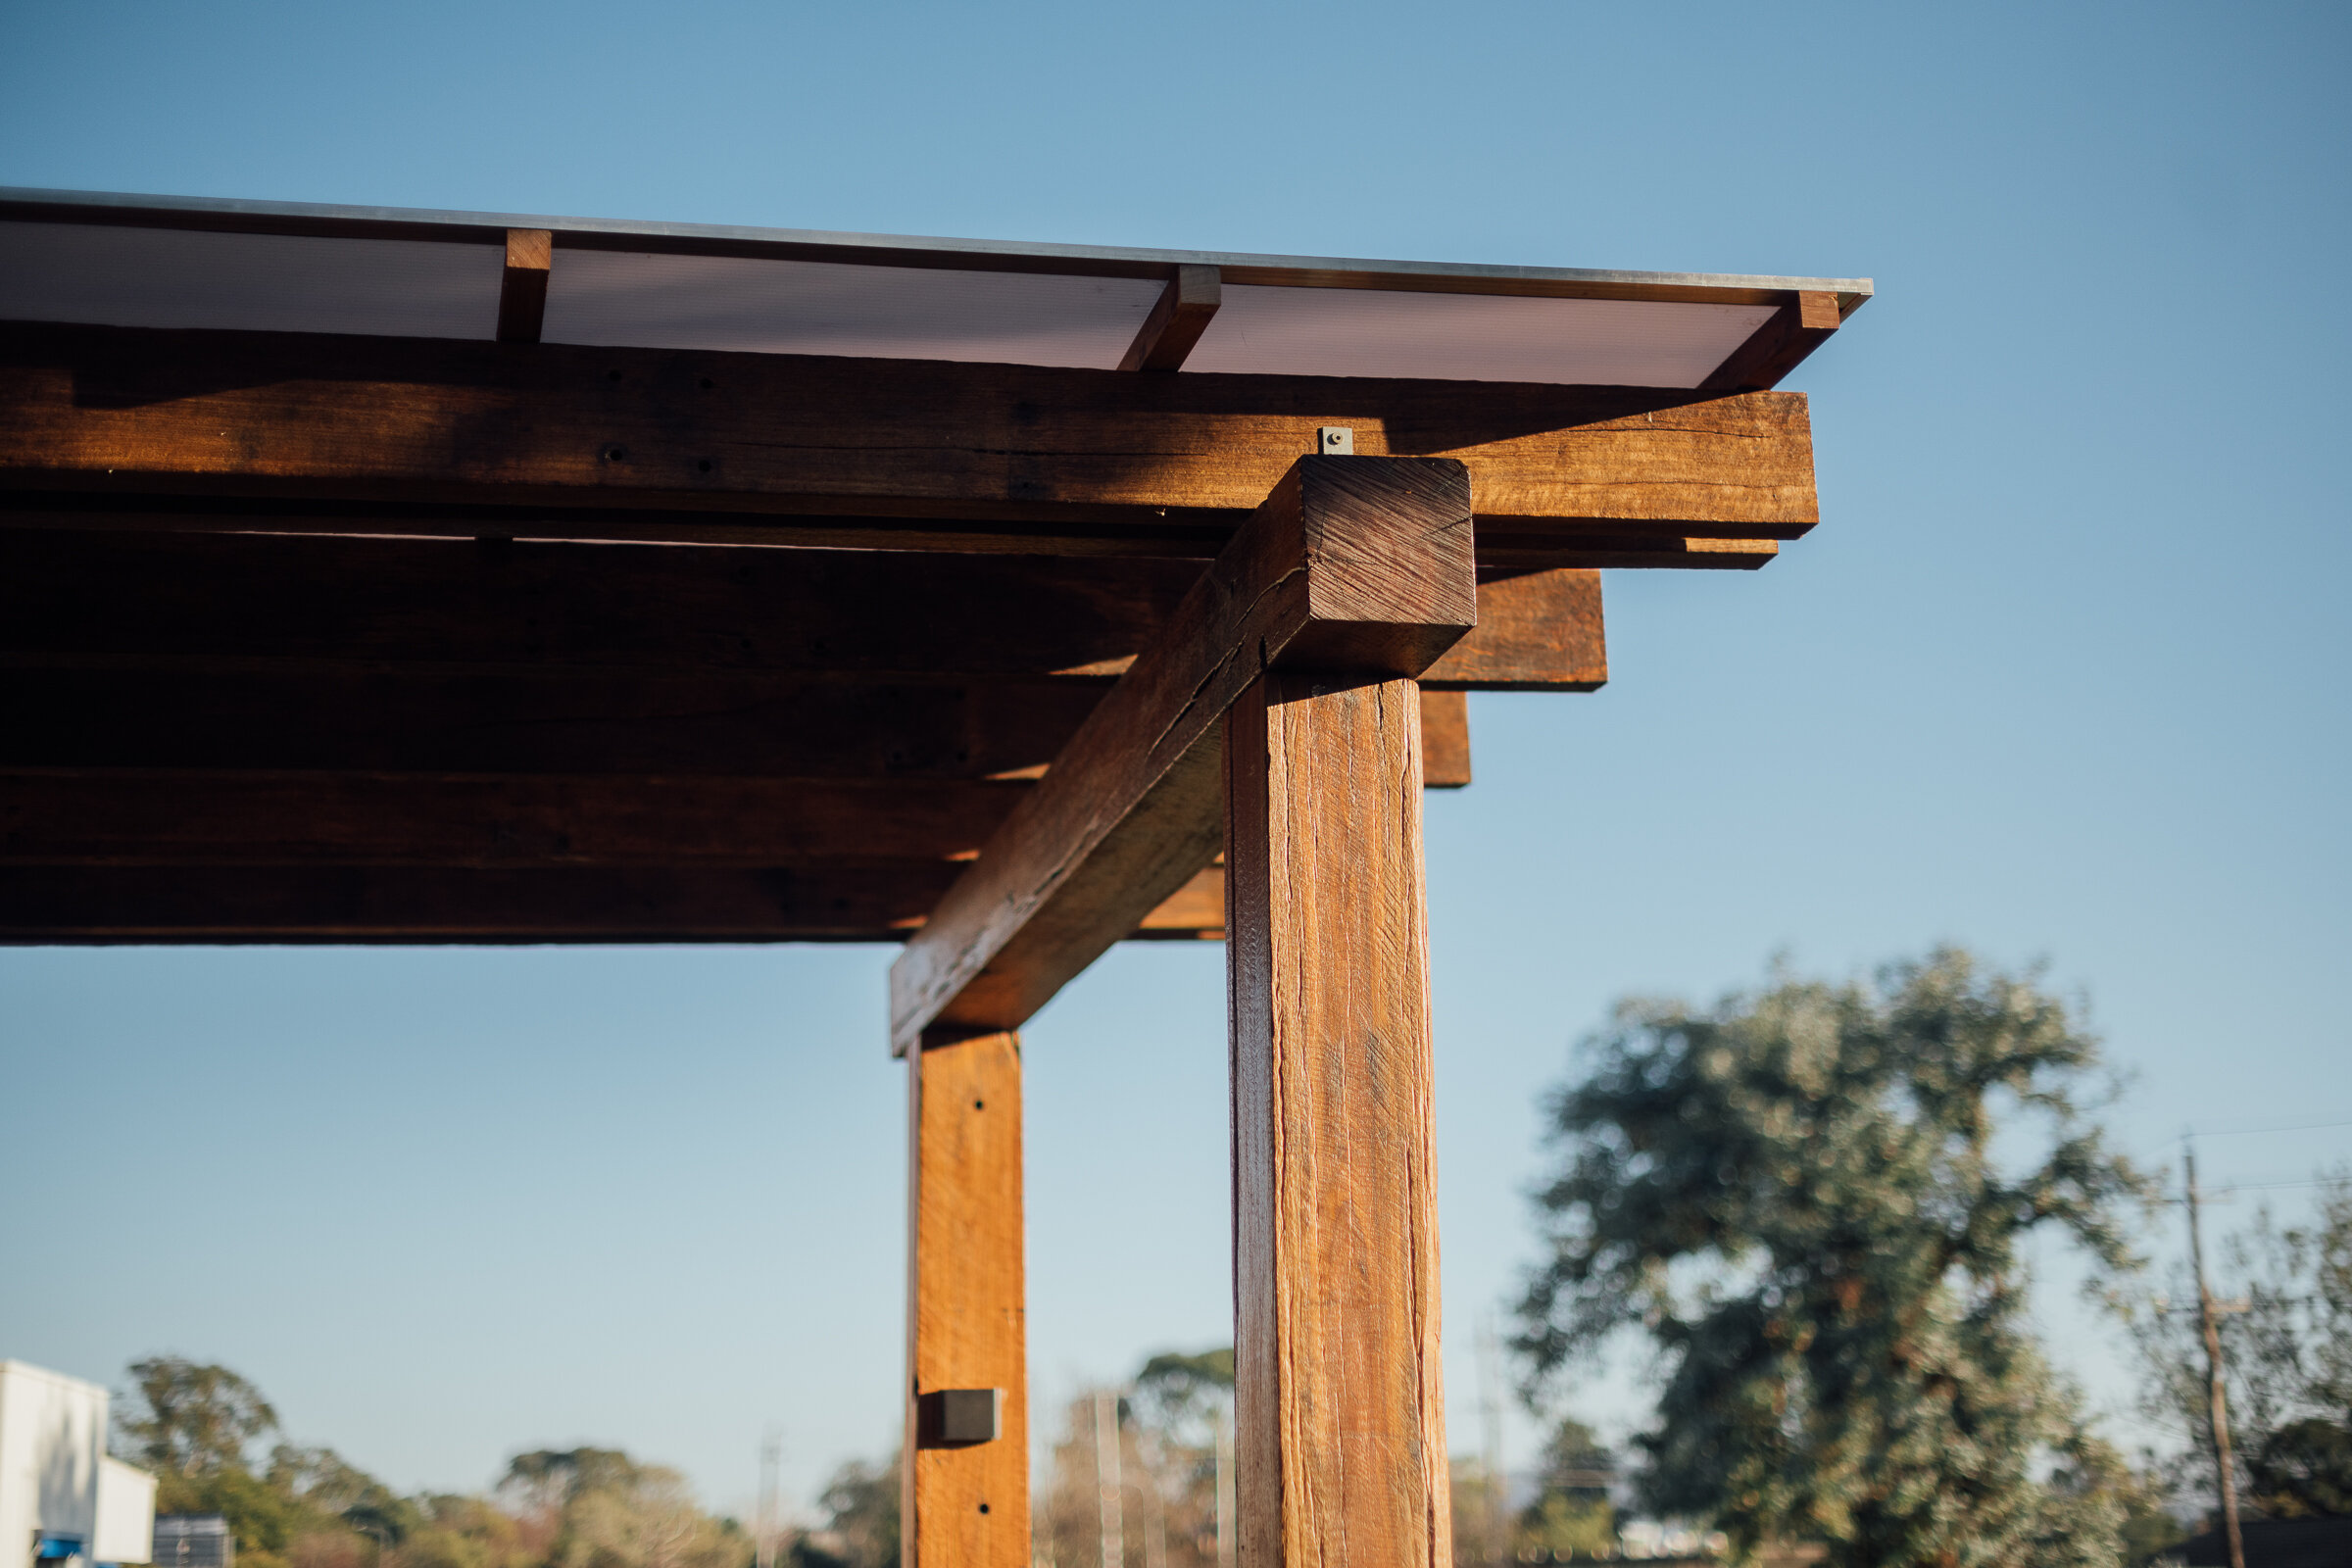 Pergola built with recycled timber posts and beams in focus against the blue sky